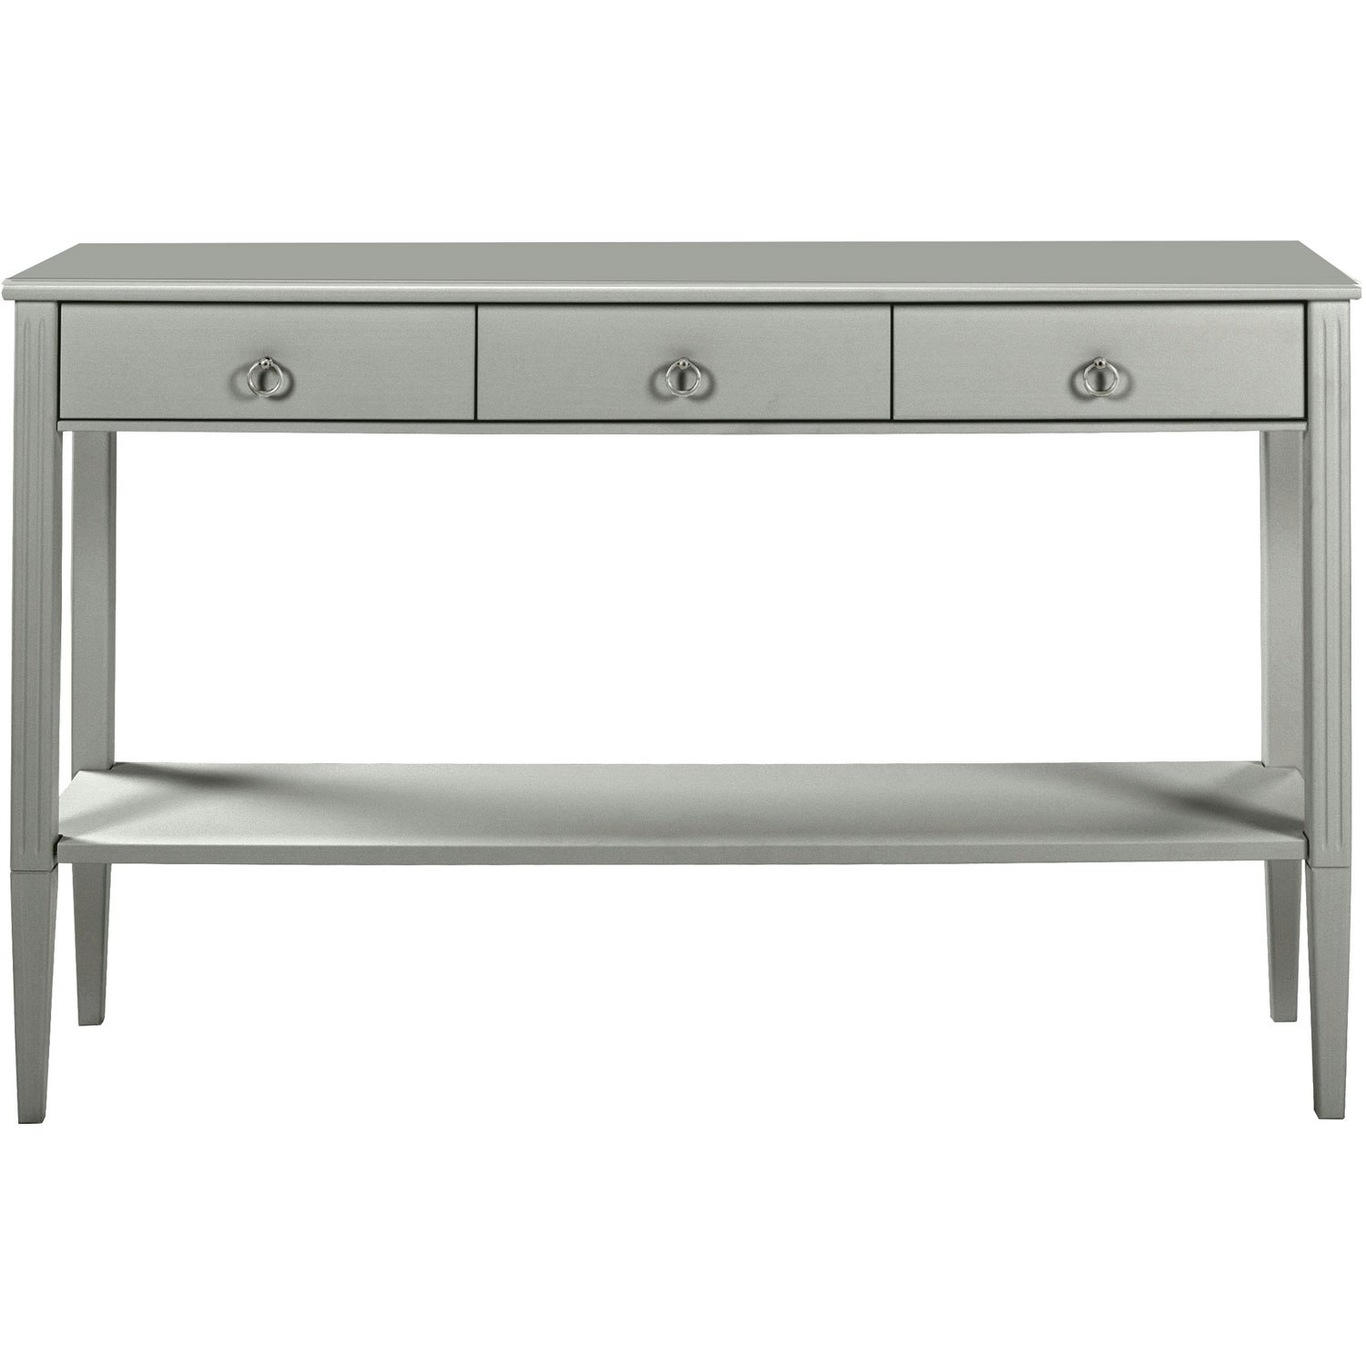 Stockholm 2.0 Side Table 130x34x80, Gray